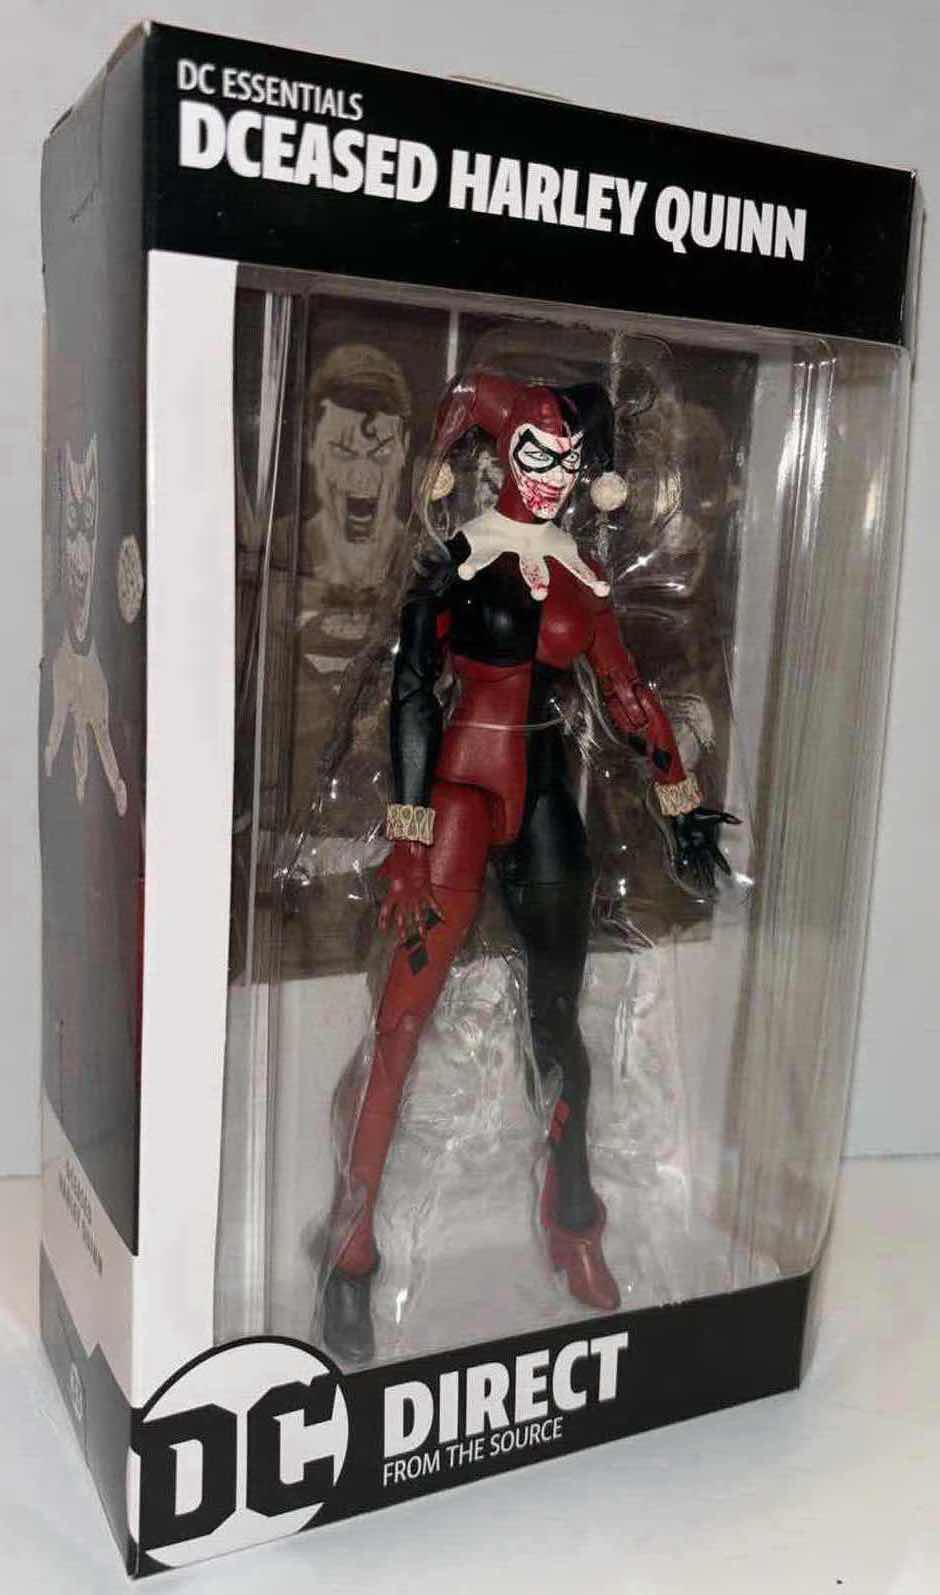 Photo 1 of NEW DC DIRECT DC ESSENTIALS ACTION FIGURE, #33“DCEASED HARLEY QUINN” (1)